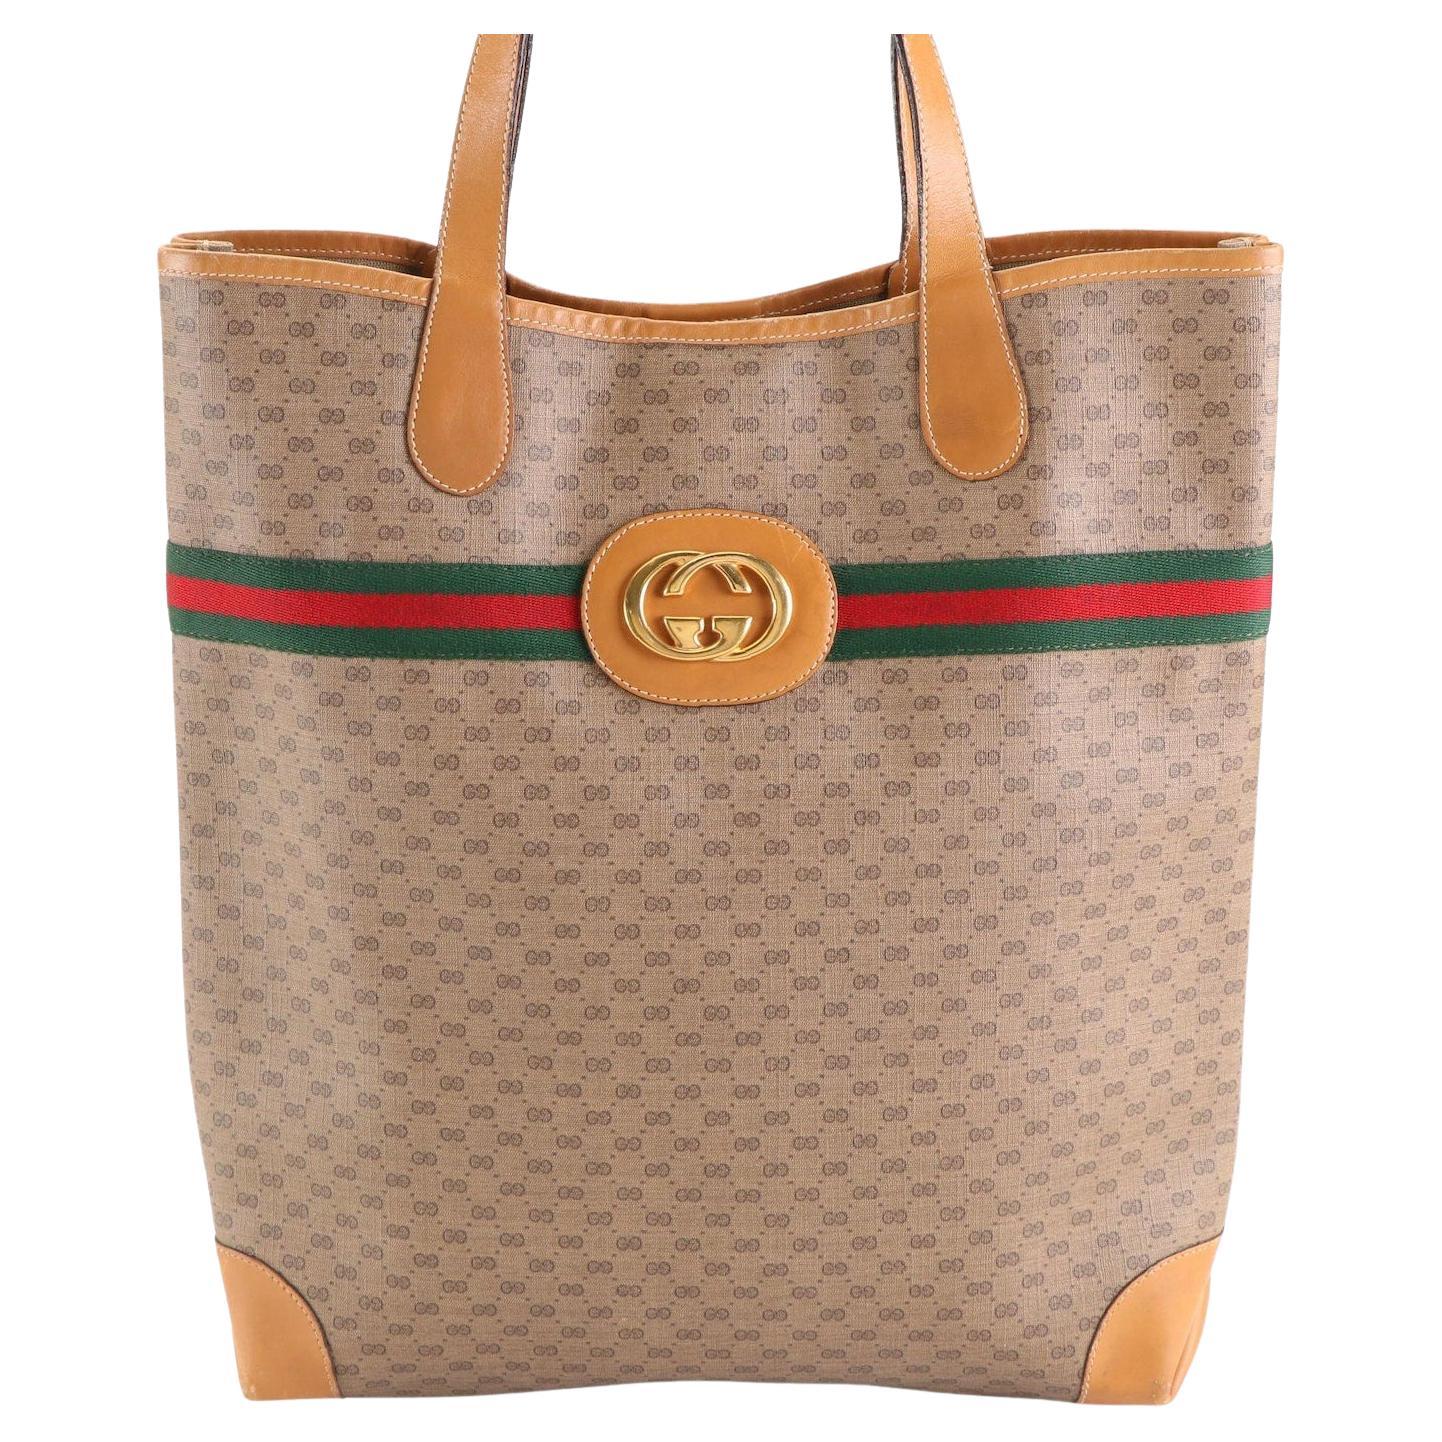 Excellent Condition Gucci Micro GG Late 80's Early 90's Vintage Tote Bag